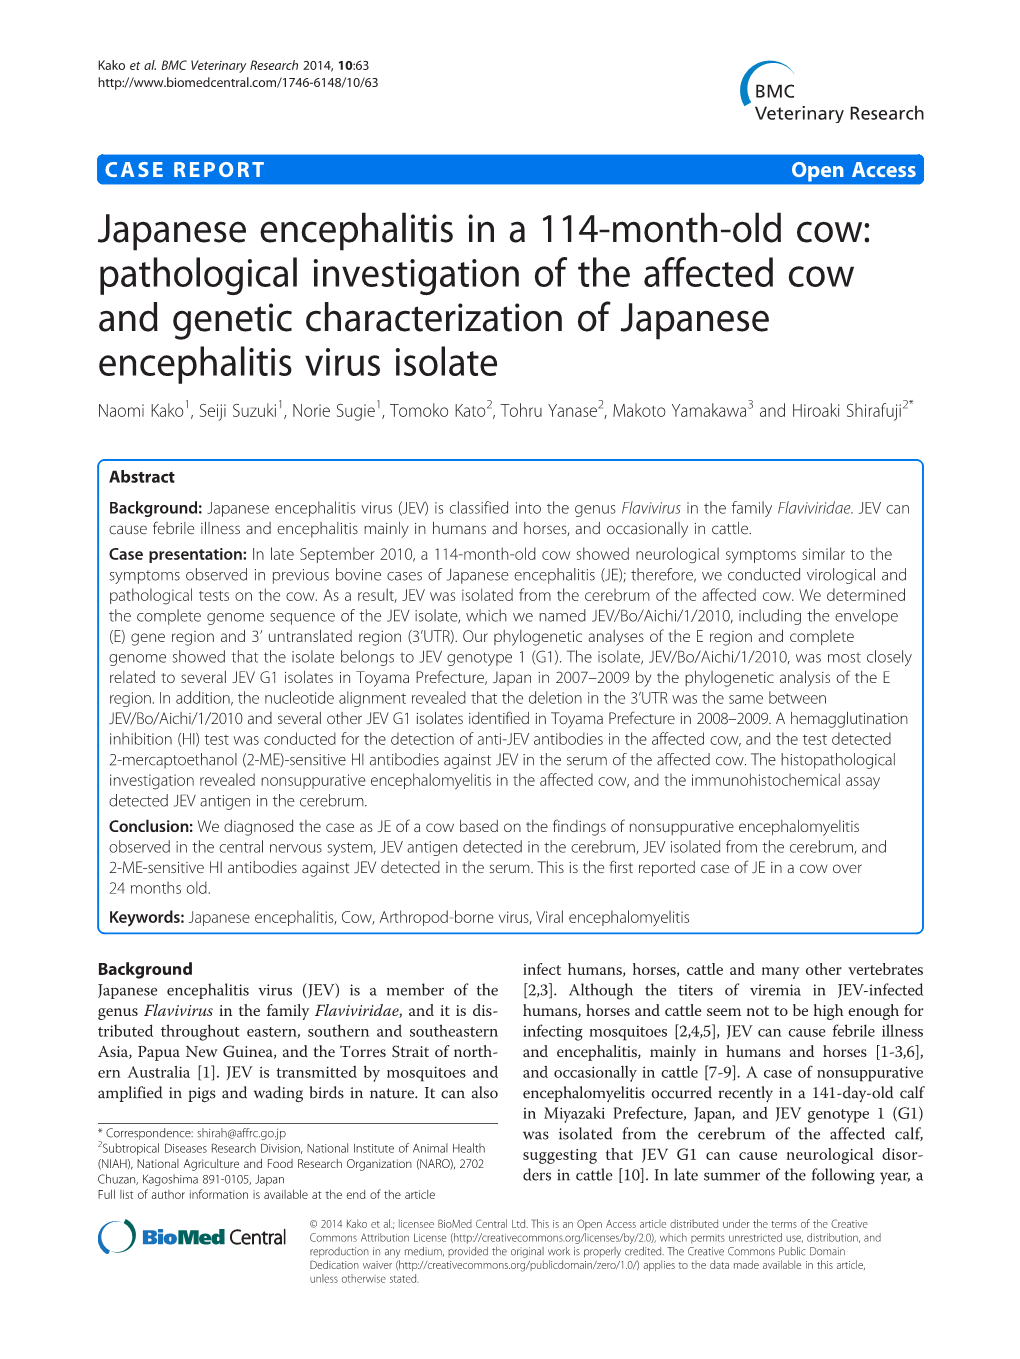 Japanese Encephalitis in a 114-Month-Old